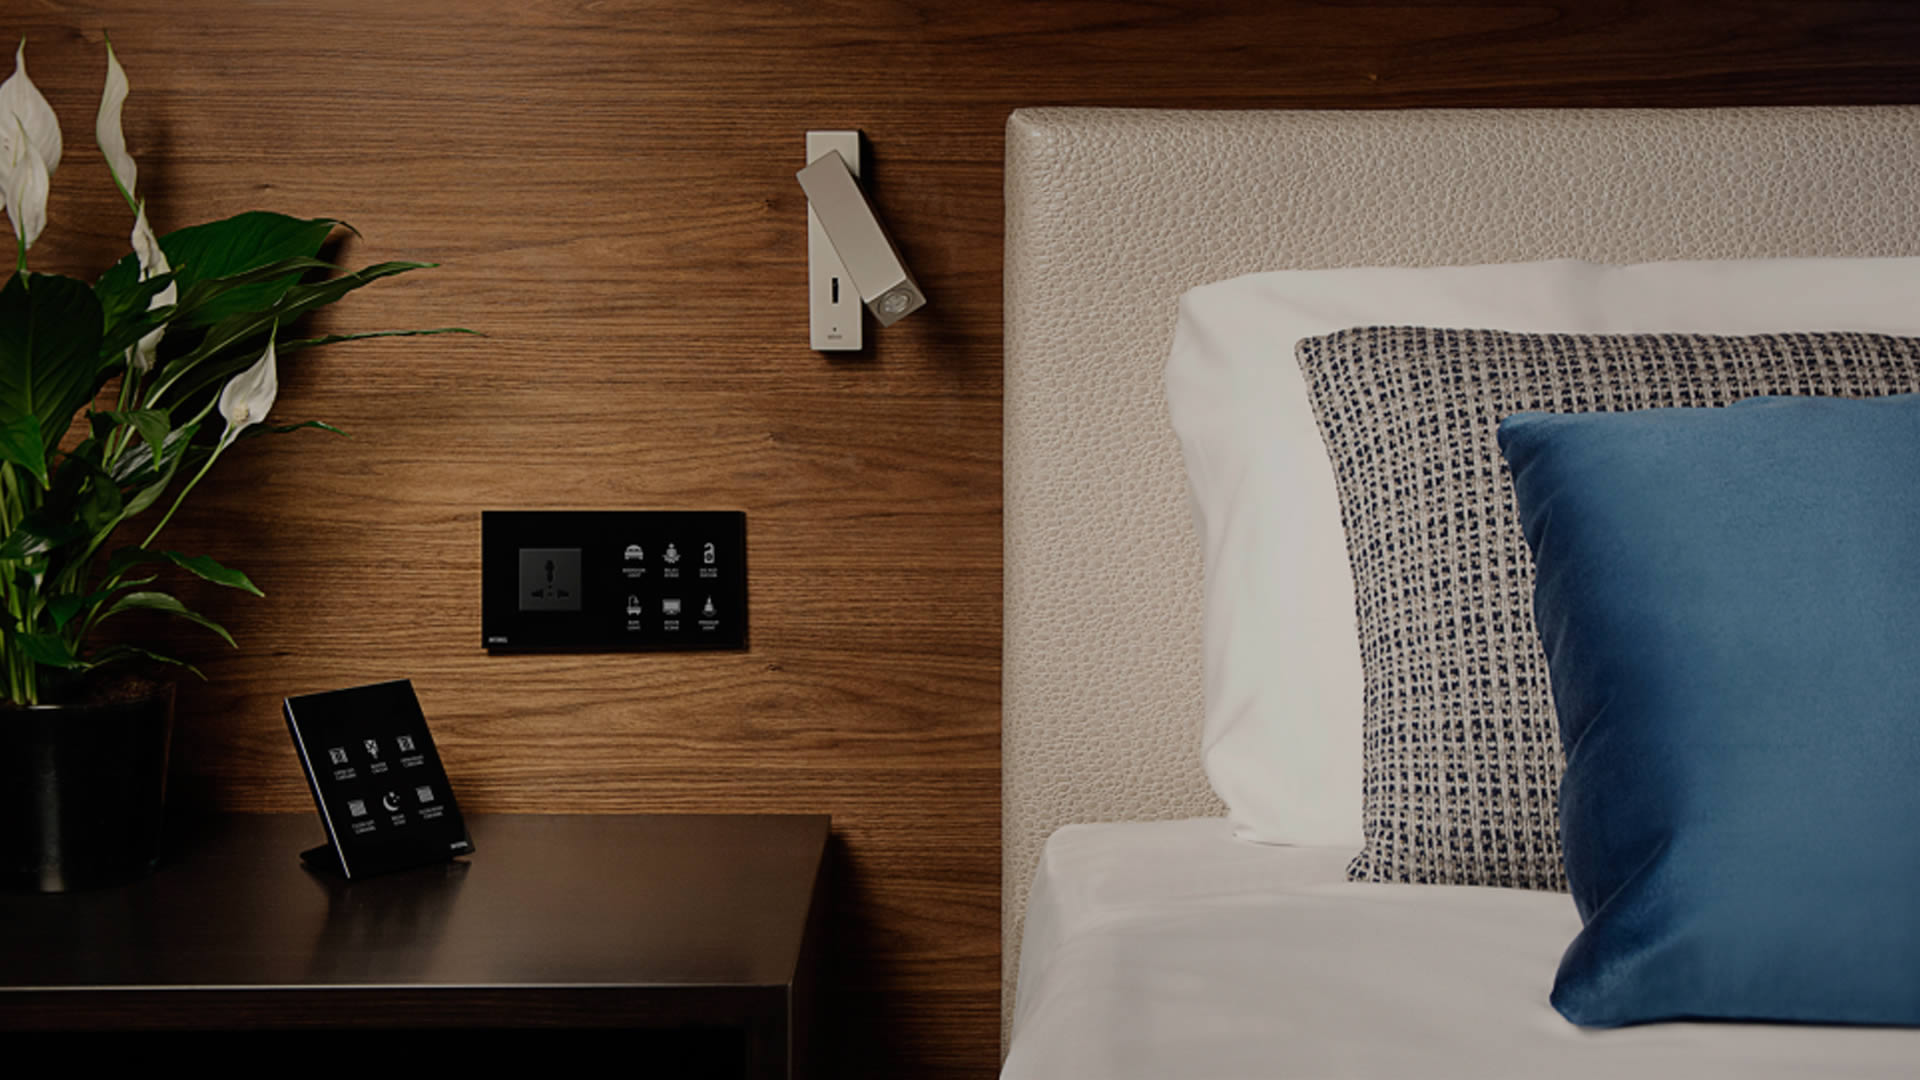 Guest room management systems